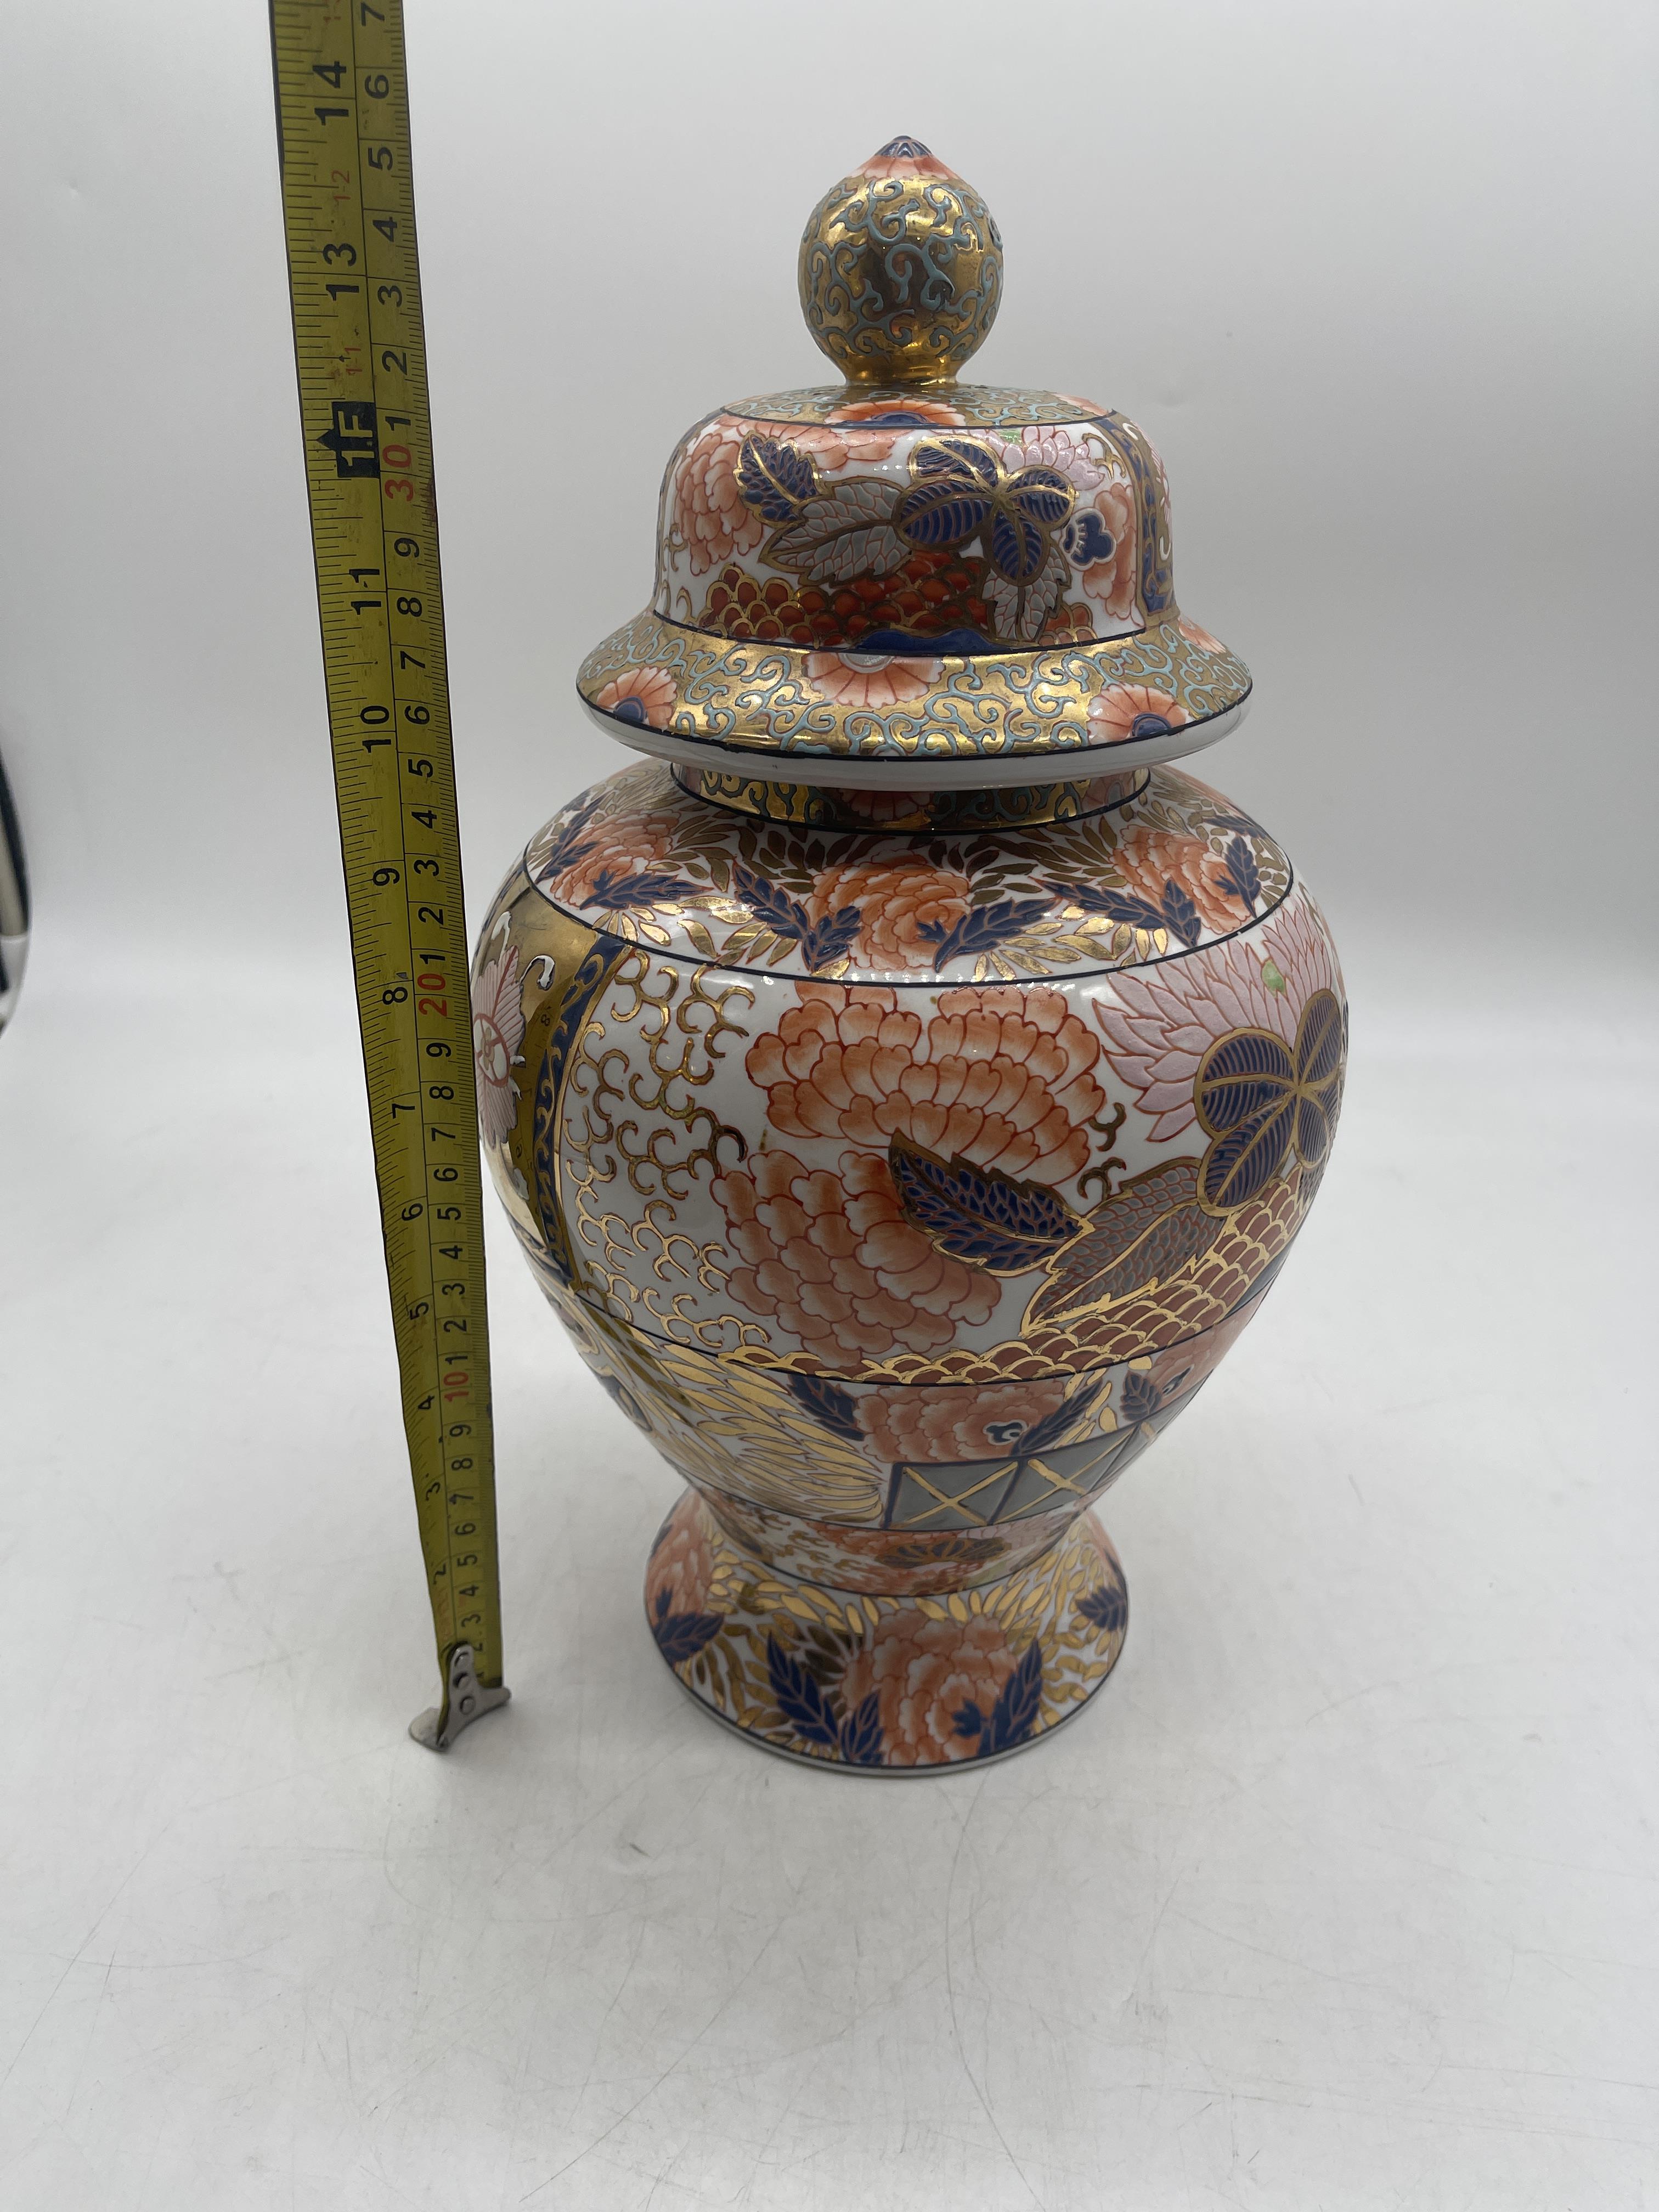 Chinese Floral Decorative Vase and Japanese Satsum - Image 21 of 21